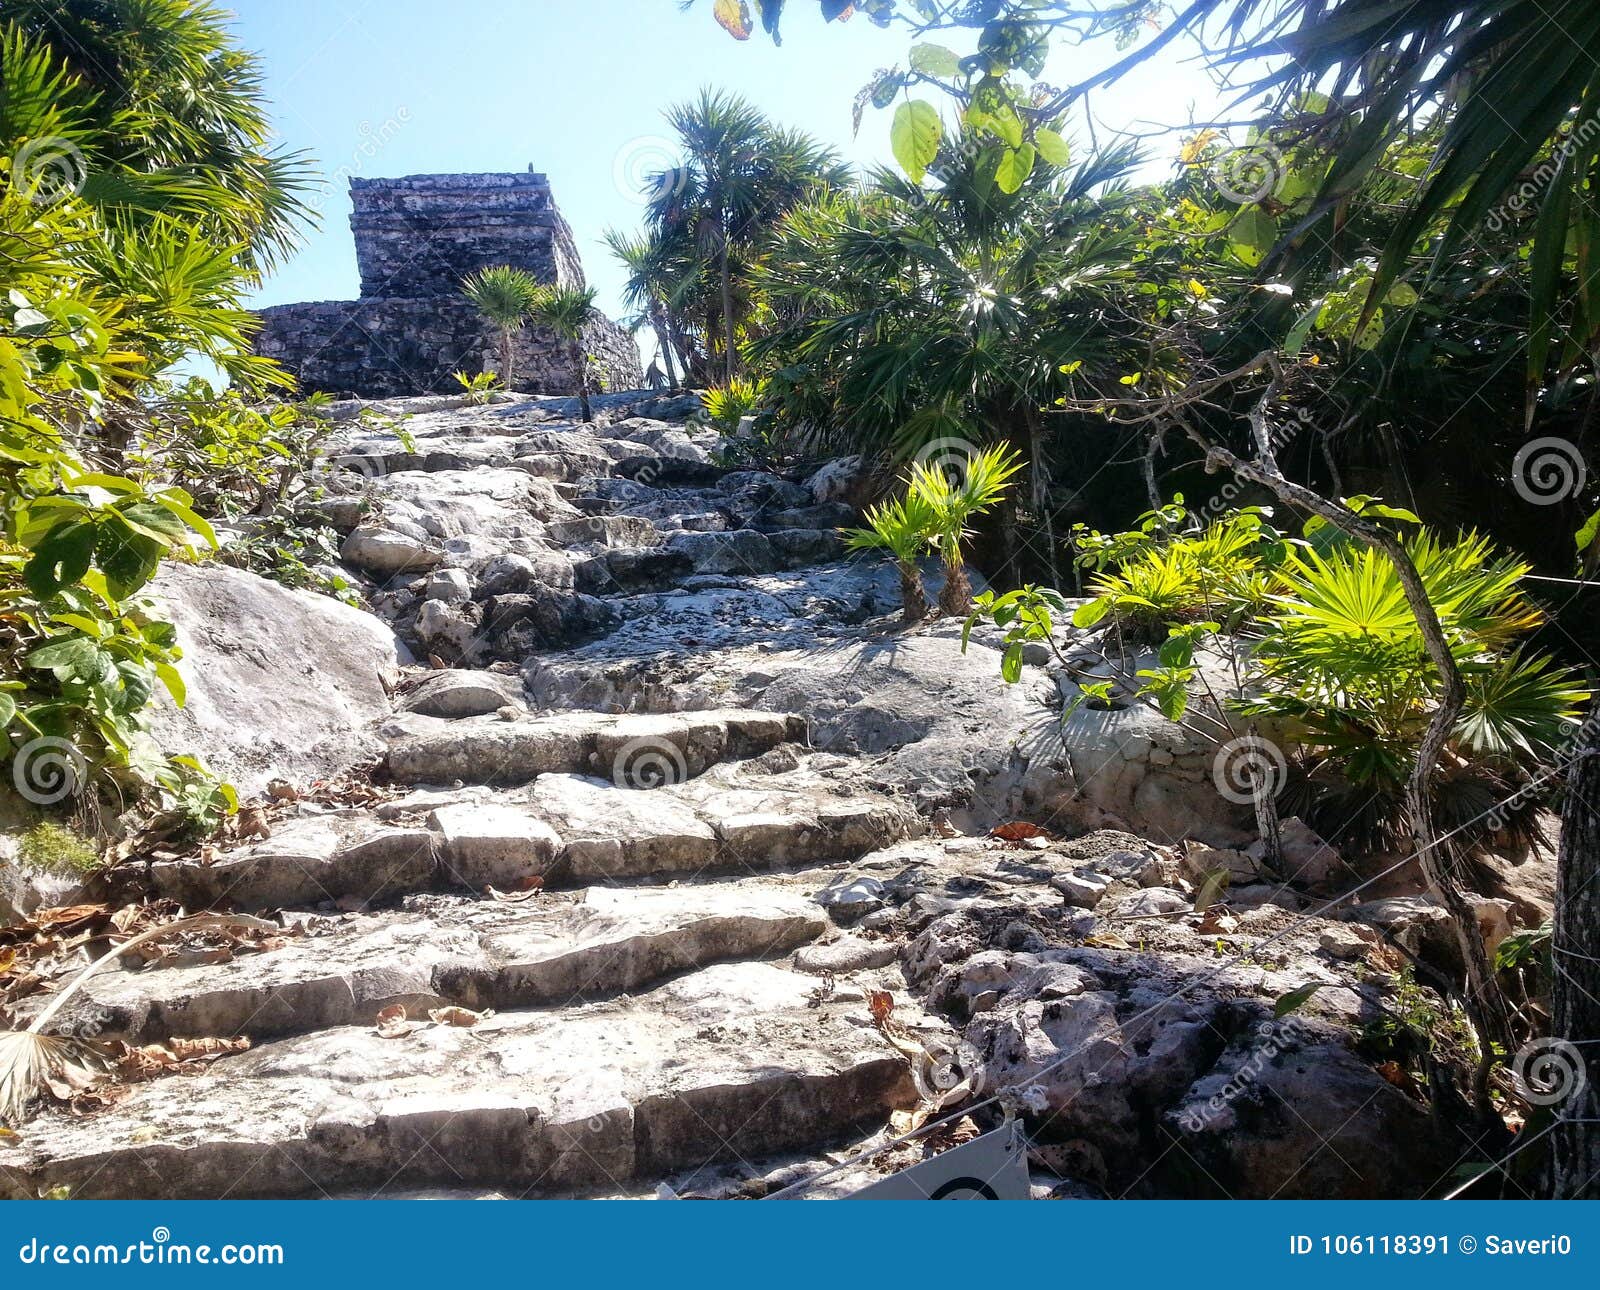 stone stairs leading to ancient mayan ruin